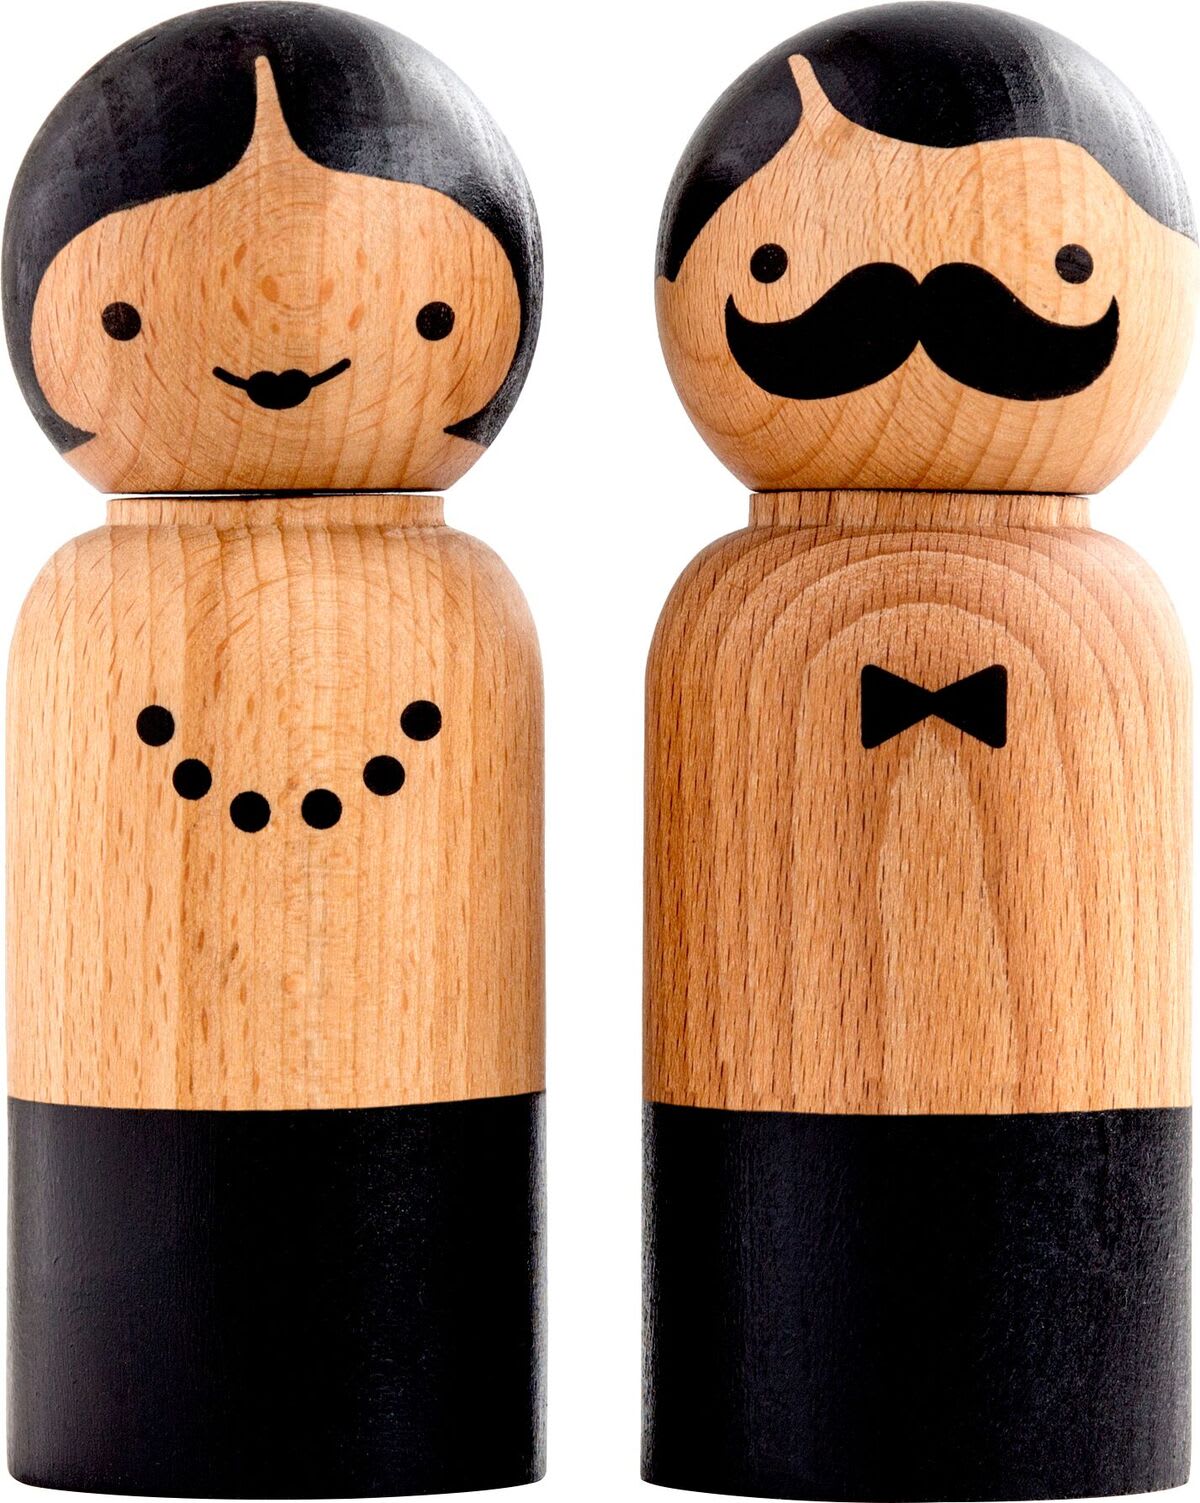 Simple Salt and Pepper Gift for Everyone on Your List